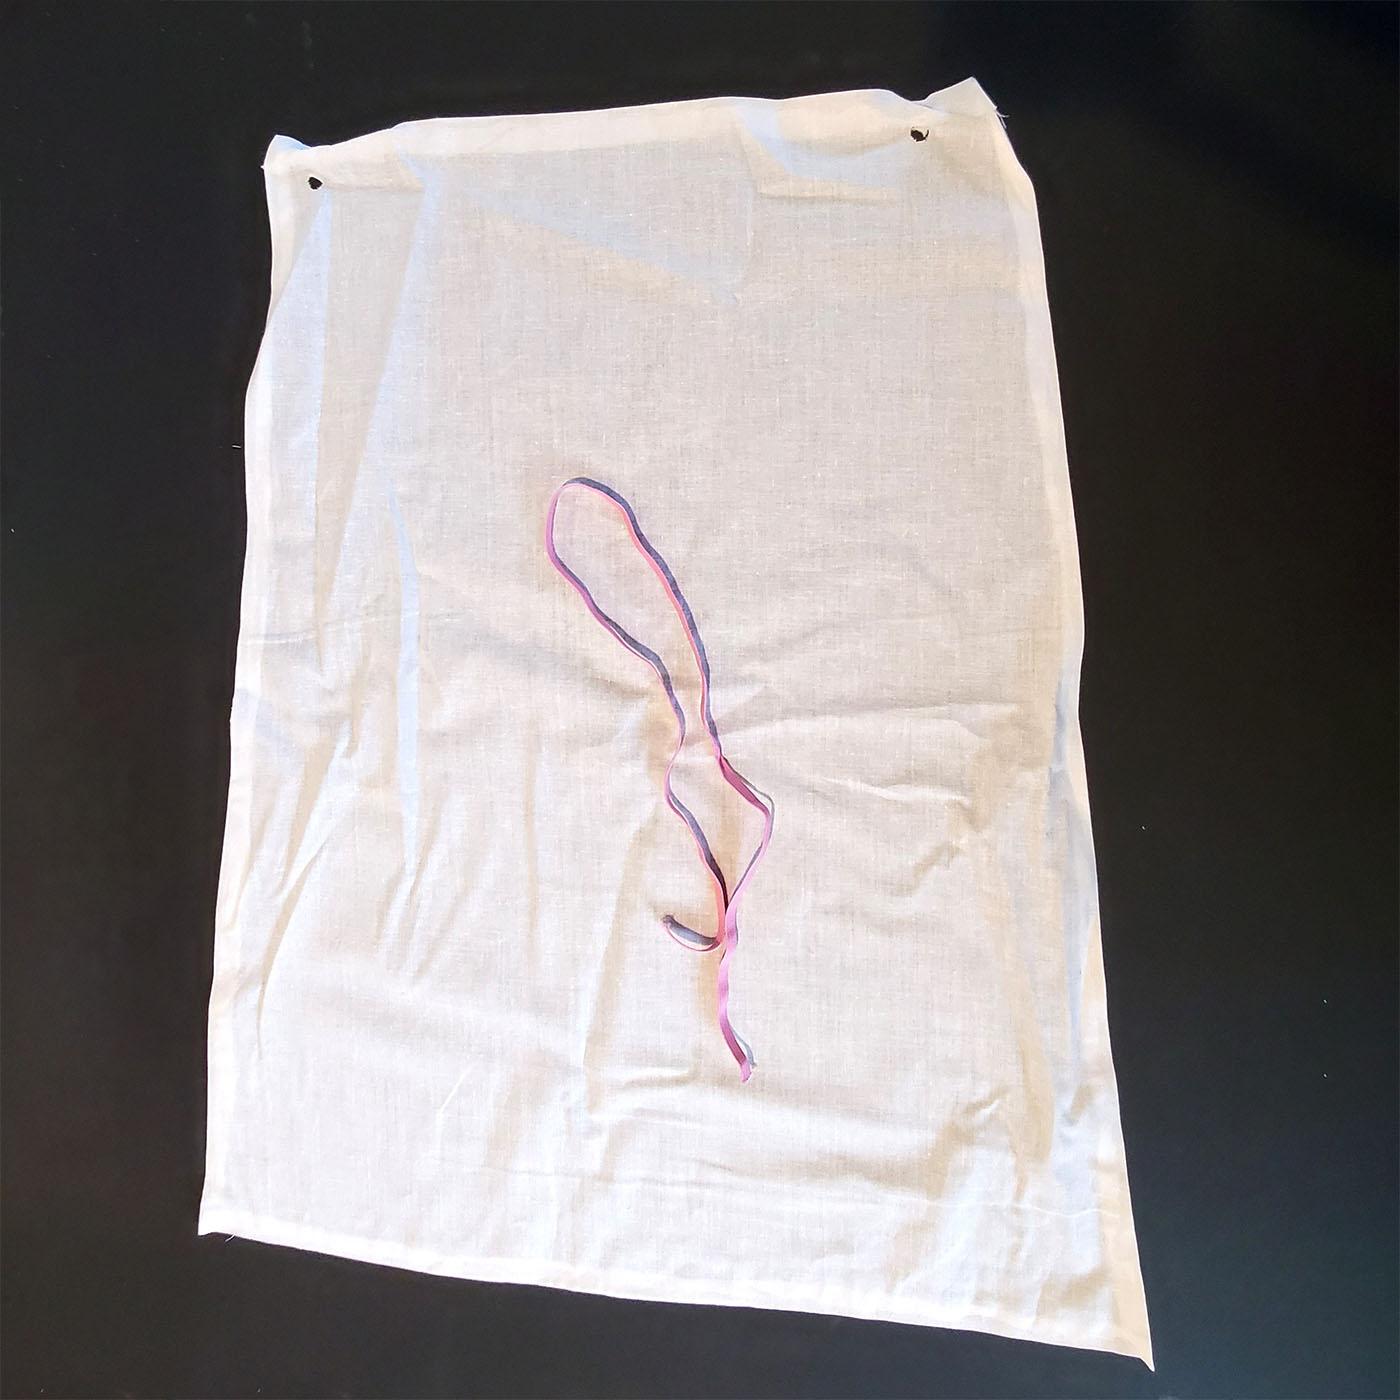 A piece of muslin fabric designed to be made into a cape